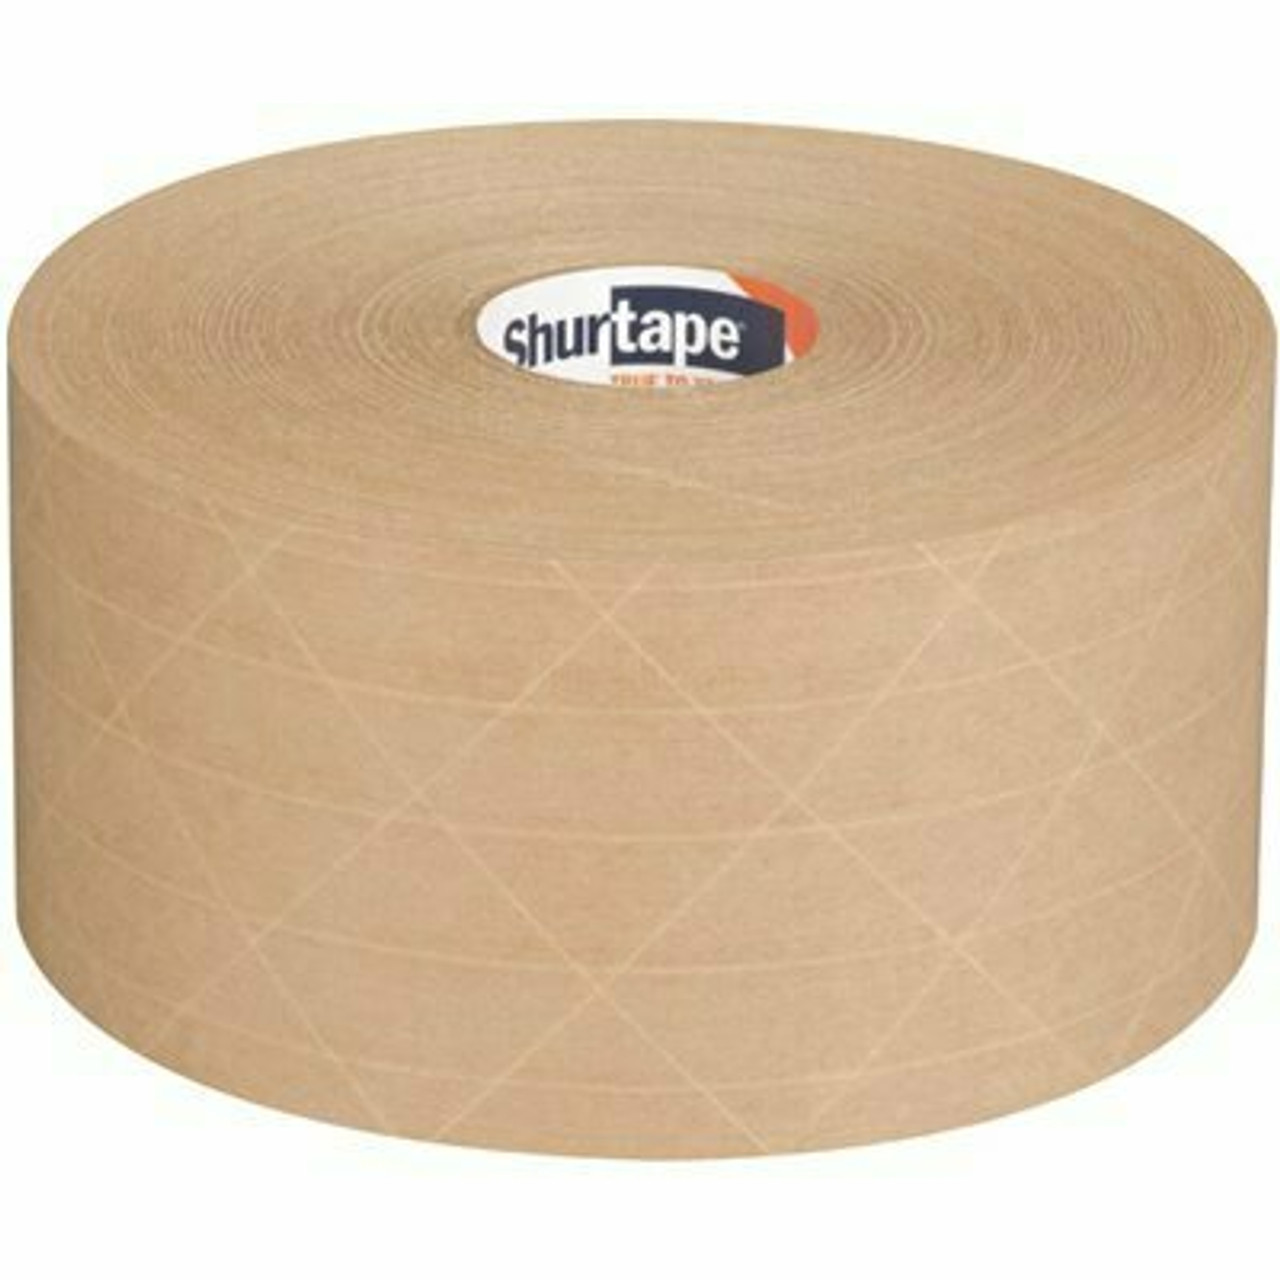 Shurtape Wp 100 5 Mils 70 Mm X 115 M (2.75 In. X 125 Yds.) Water Activated Paper Tape, Natural (1-Case) (8-Roll)